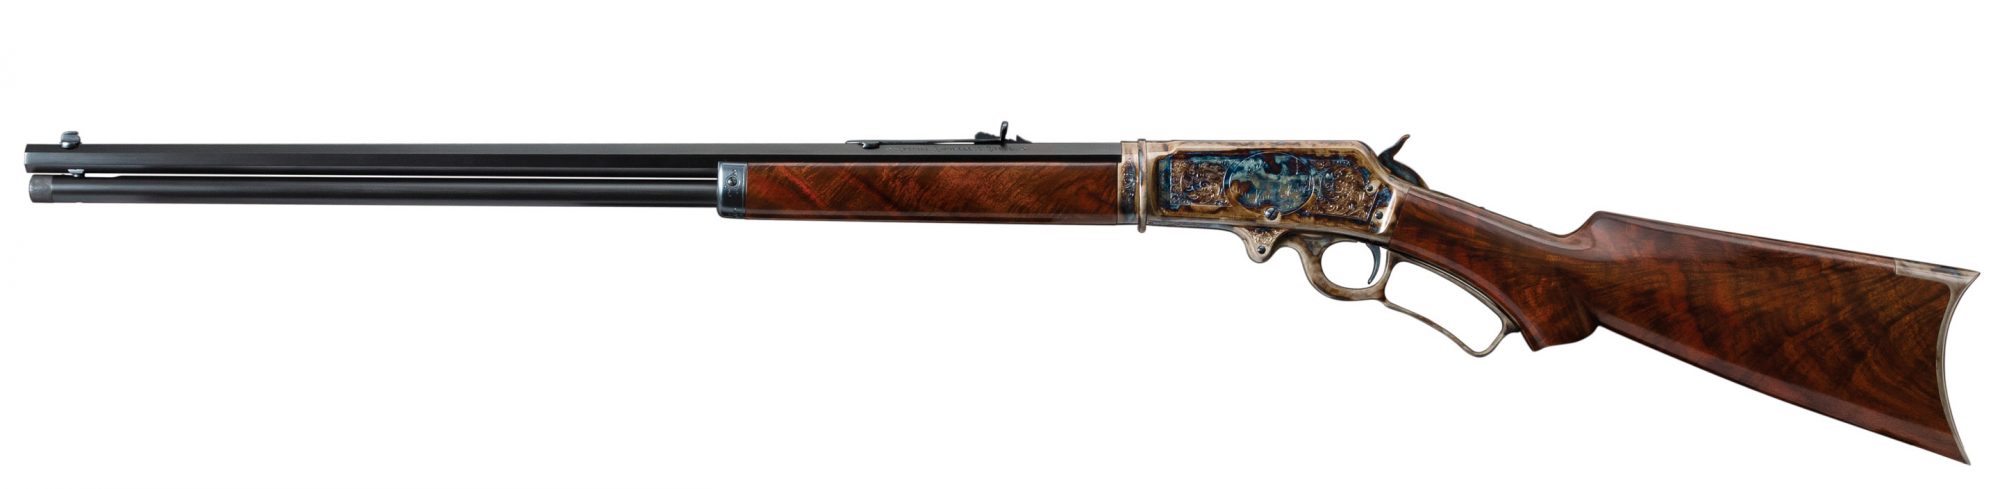 Photo of a Marlin Model 1893 from 1906, after restoration by Turnbull Restoration of Bloomfield, NY